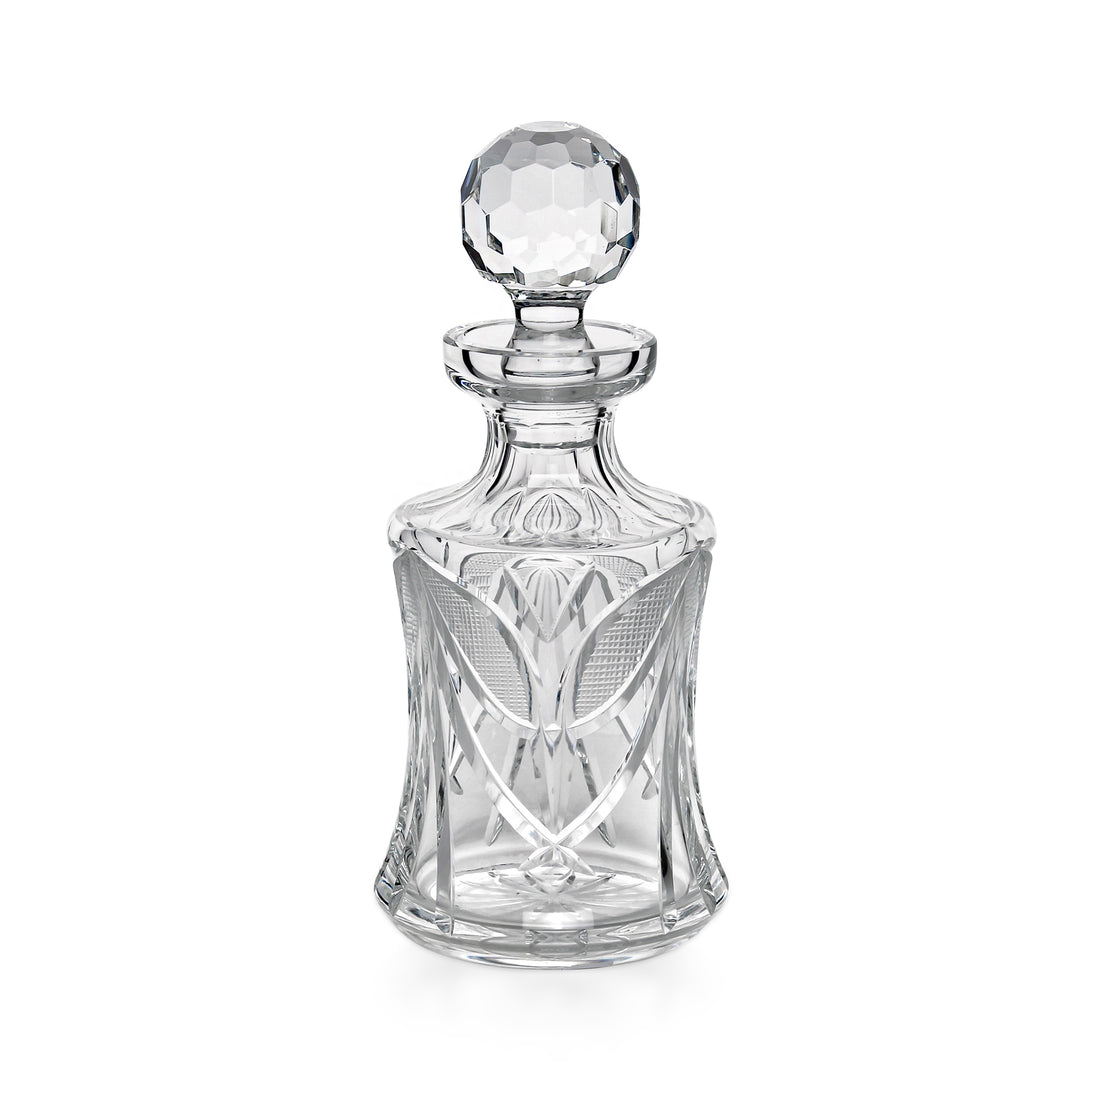 WATERFORD Crystal Spirits Decanter